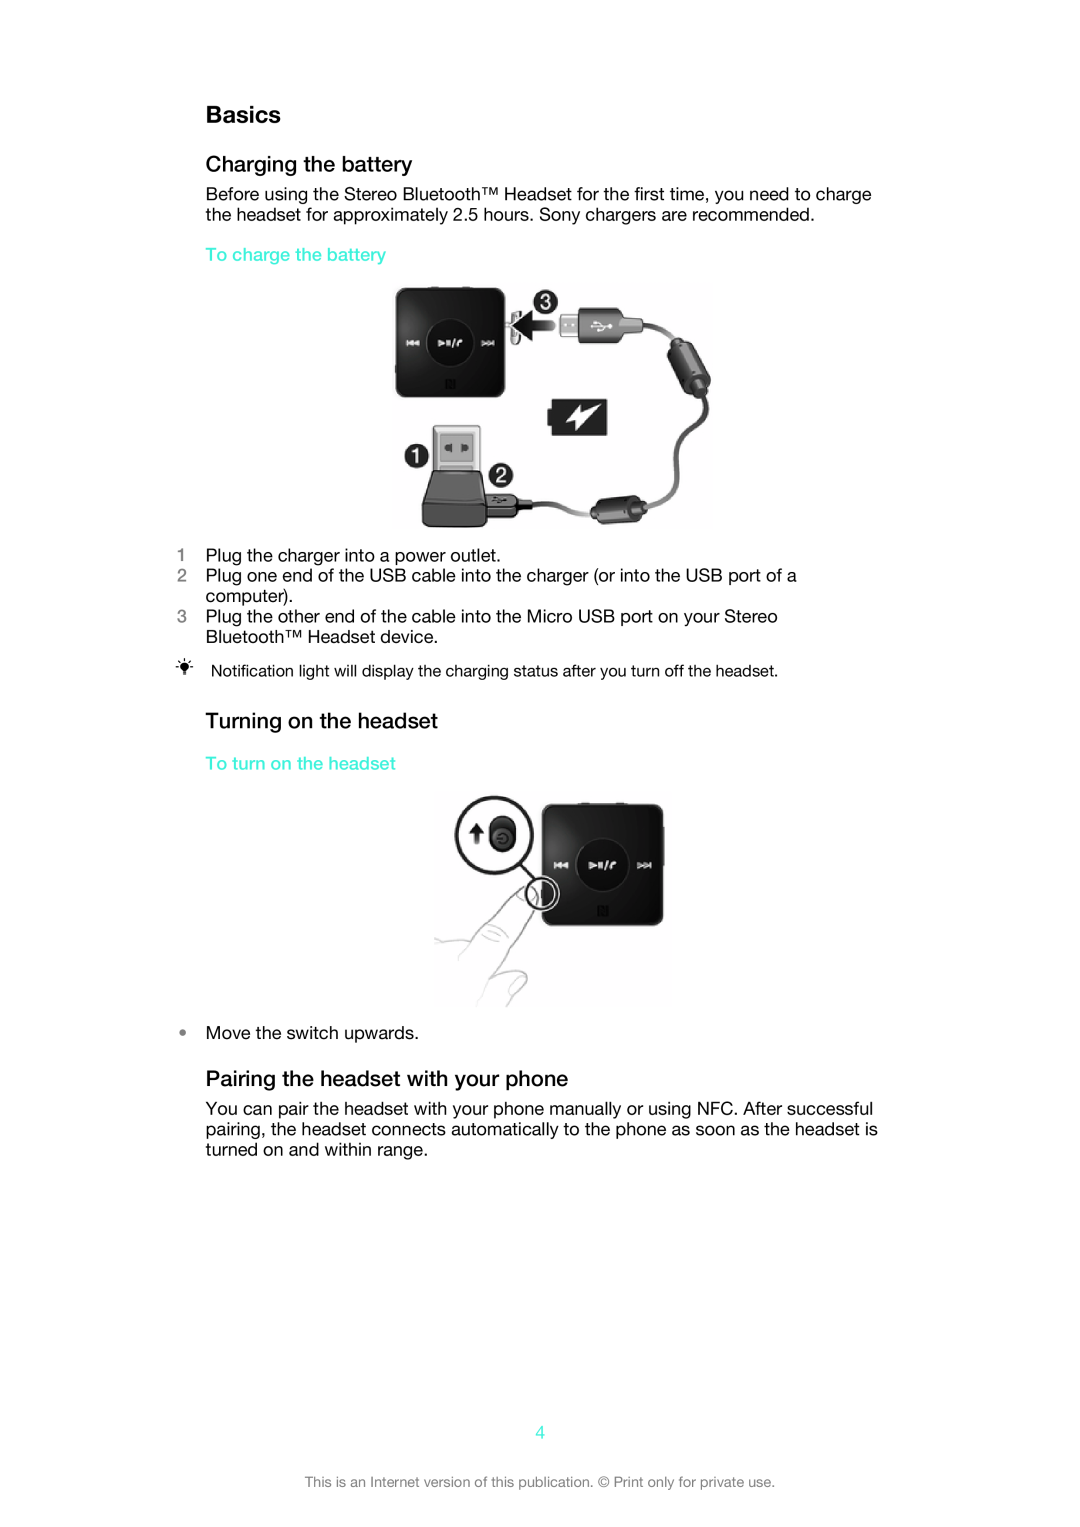 Sony SBH20 manual Basics, Charging the battery, Turning on the headset, Pairing the headset with your phone 